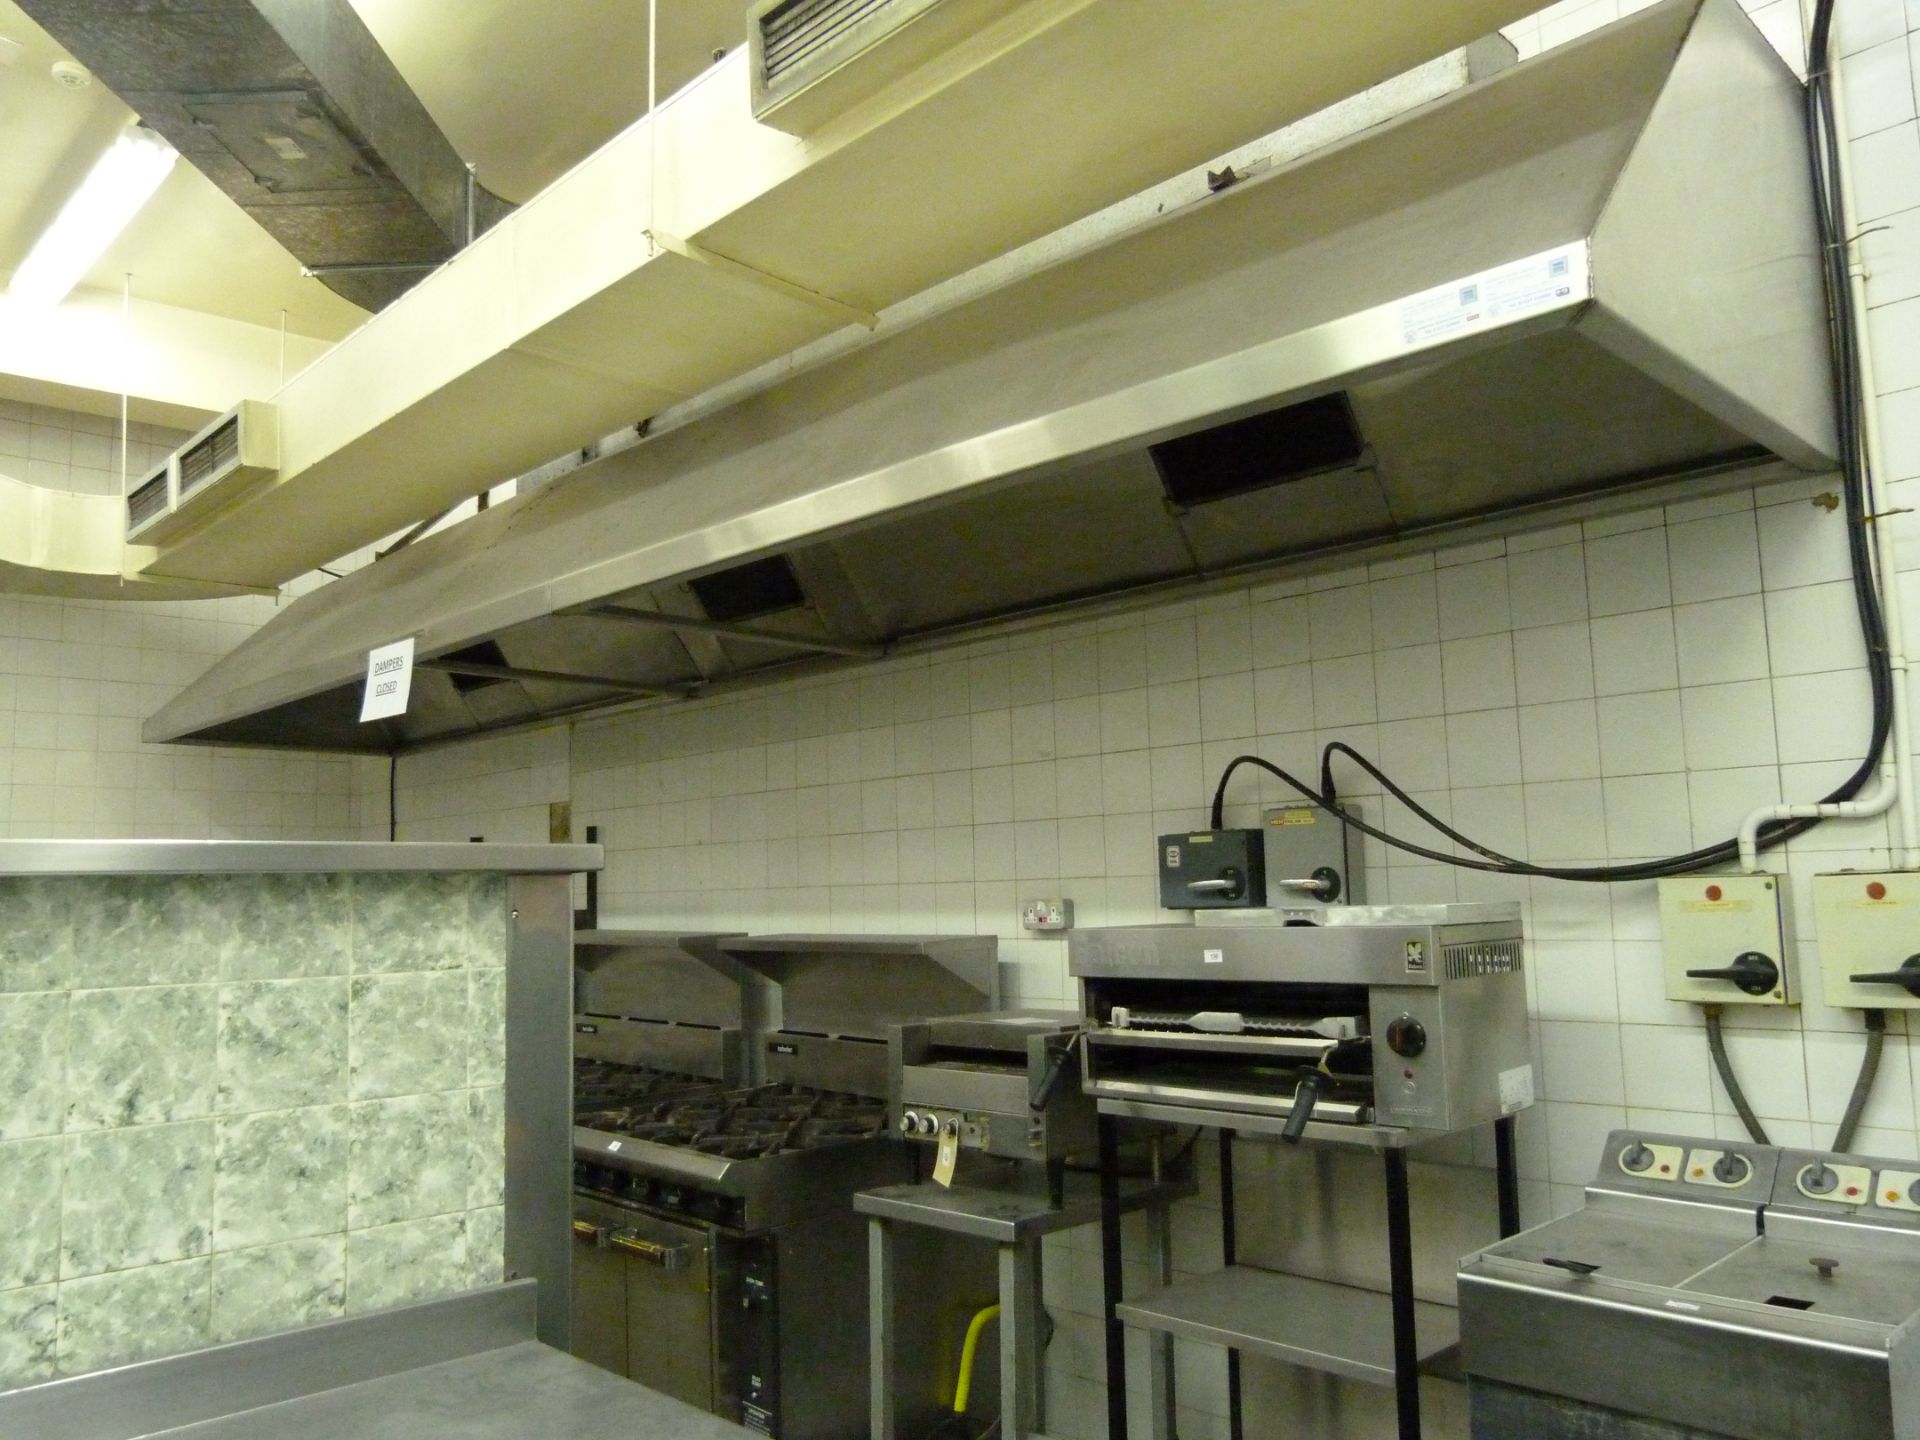 A kitchen extractor hood 580cm x 108cm x 69cm approximately